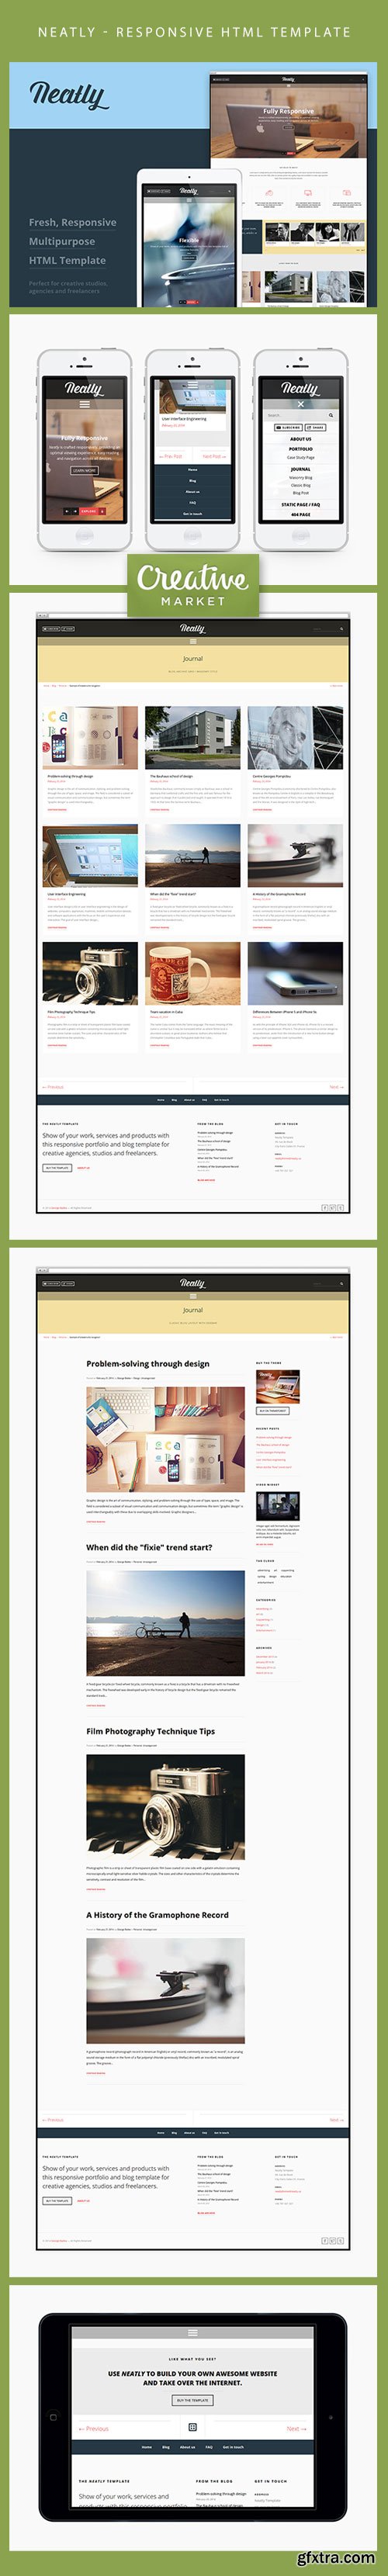 Neatly - Responsive HTML Template CM 30383